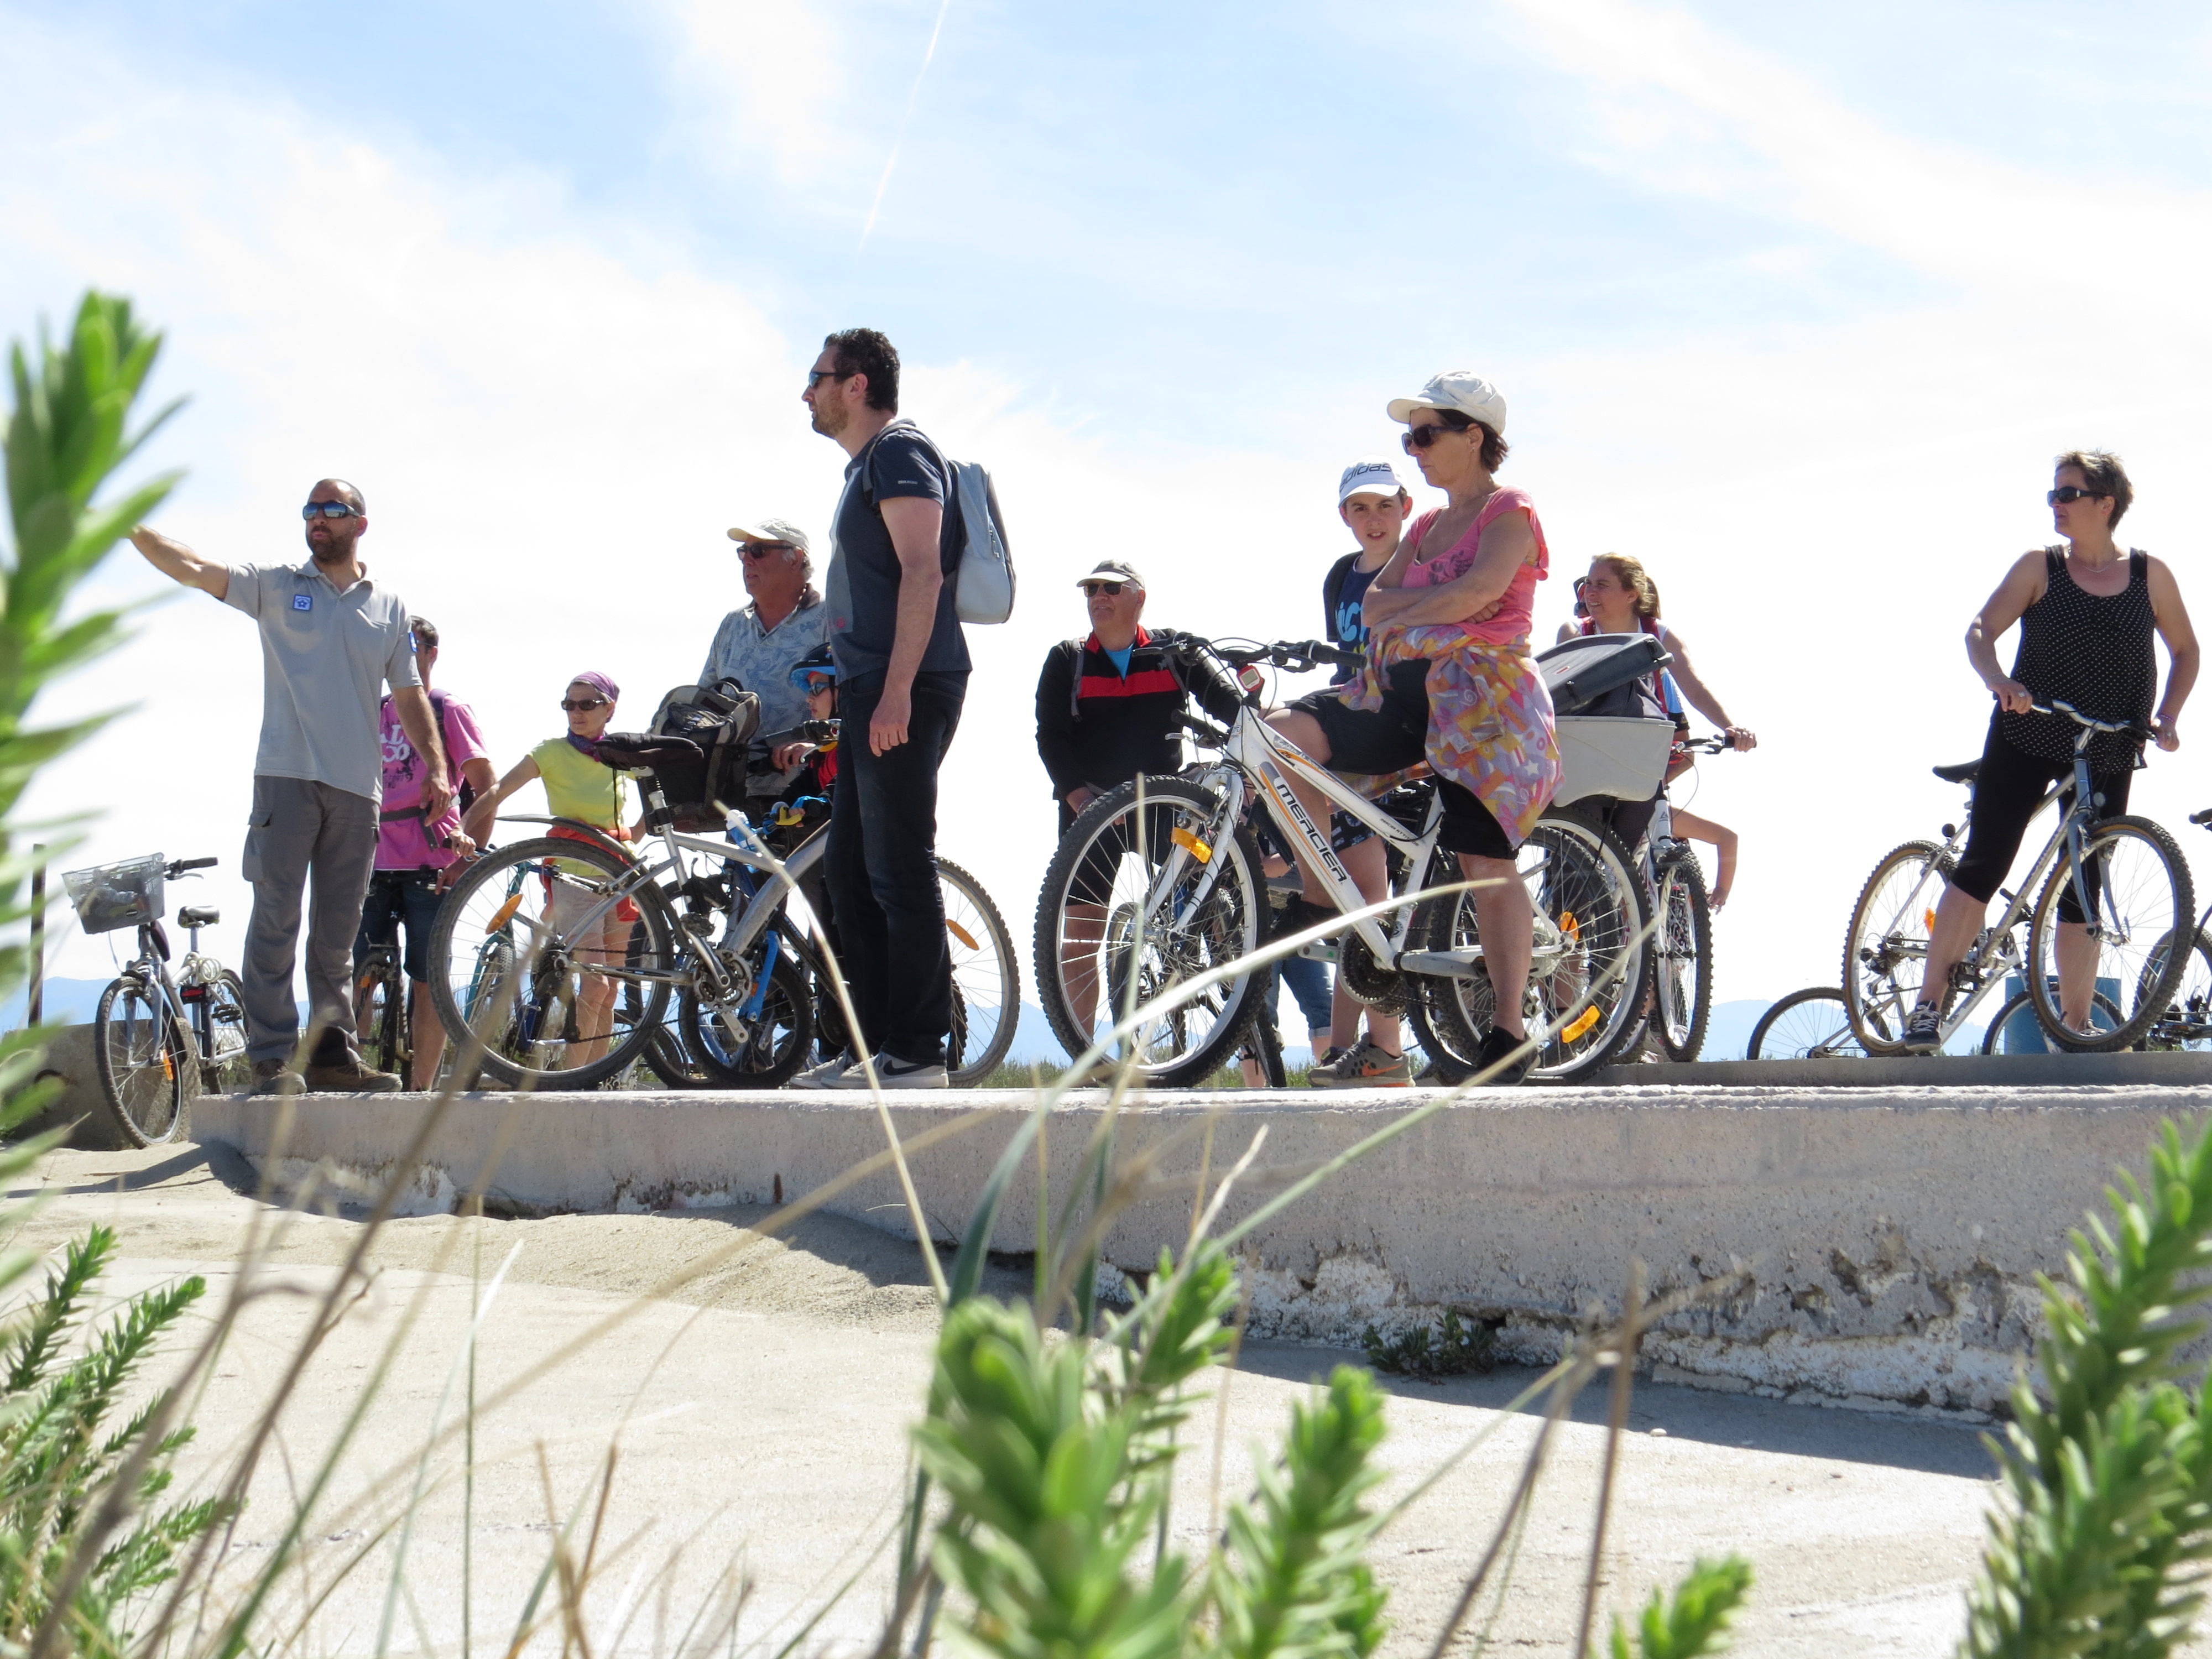 DISCOVER THE BEACH BY BIKE